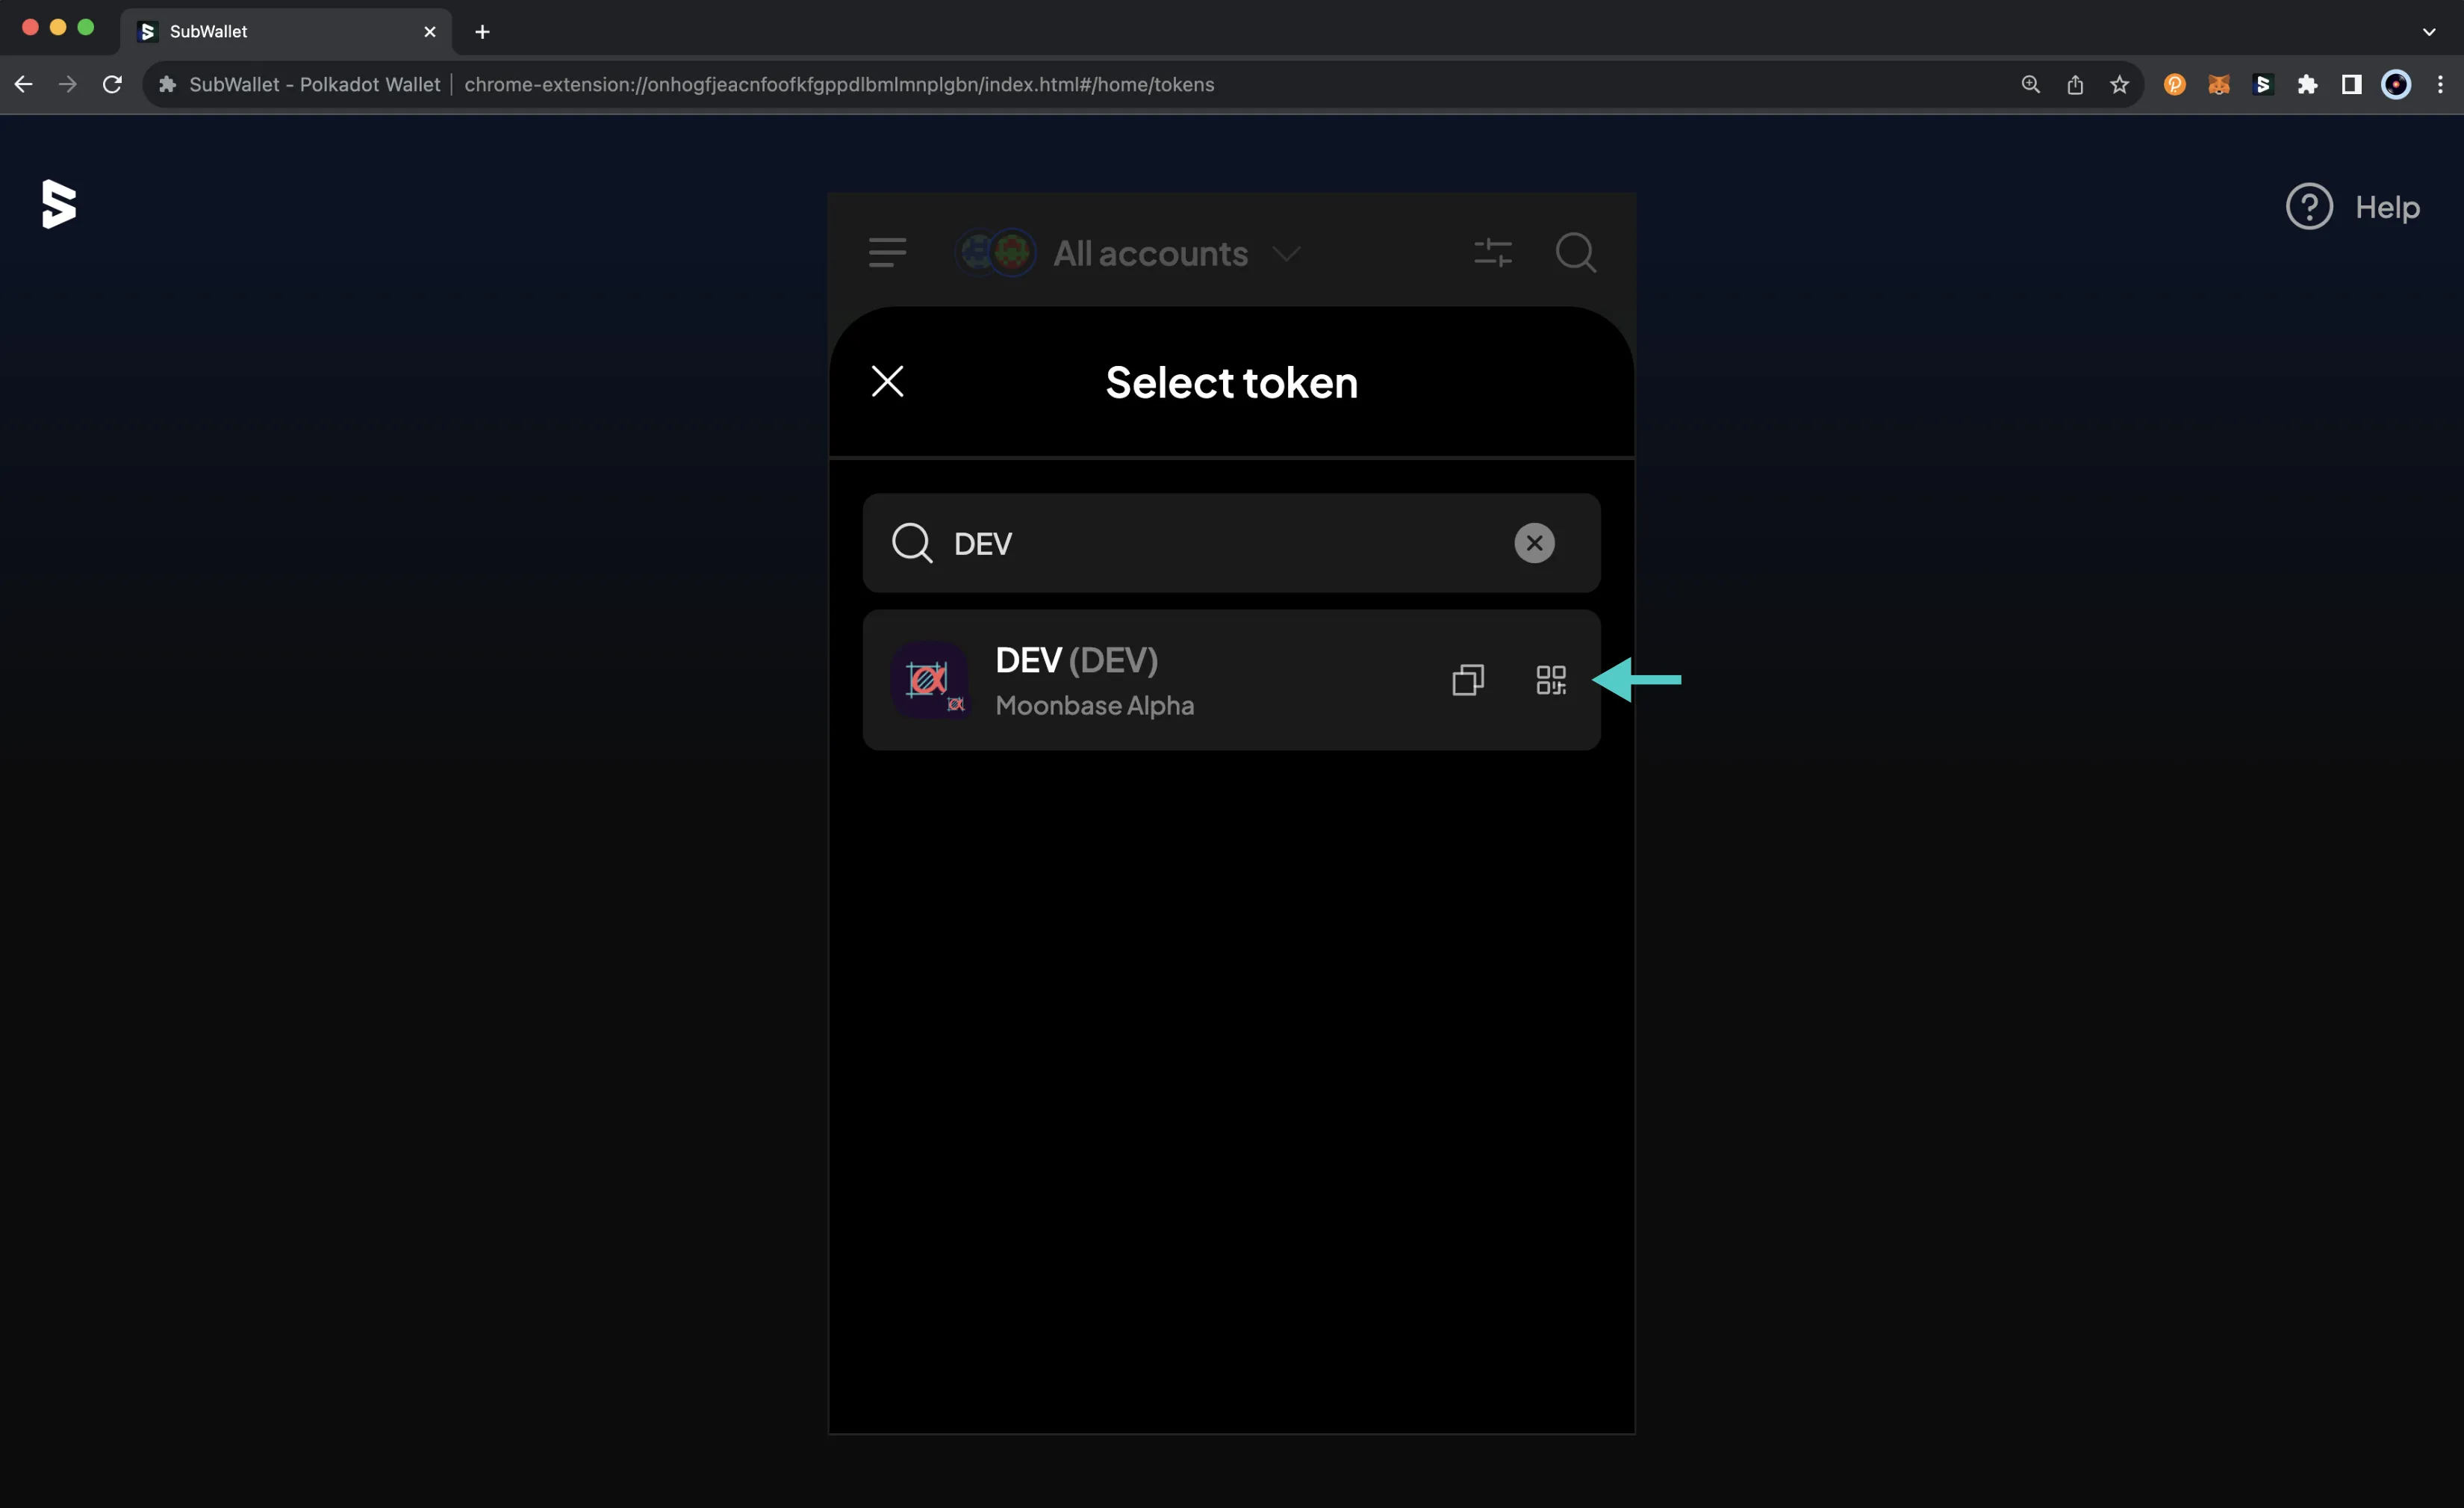 Search and choose desired token on the SubWallet browser extension.